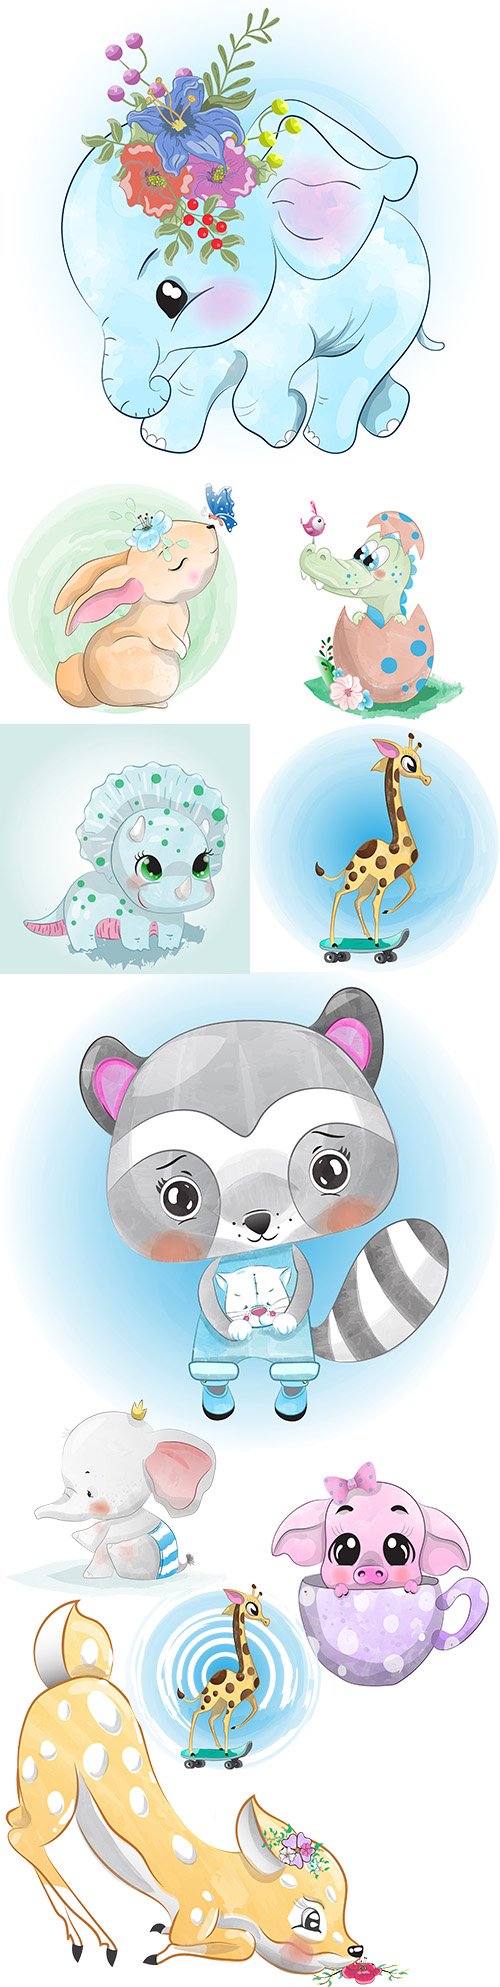 Cute baby animals watercolor drawing illustration